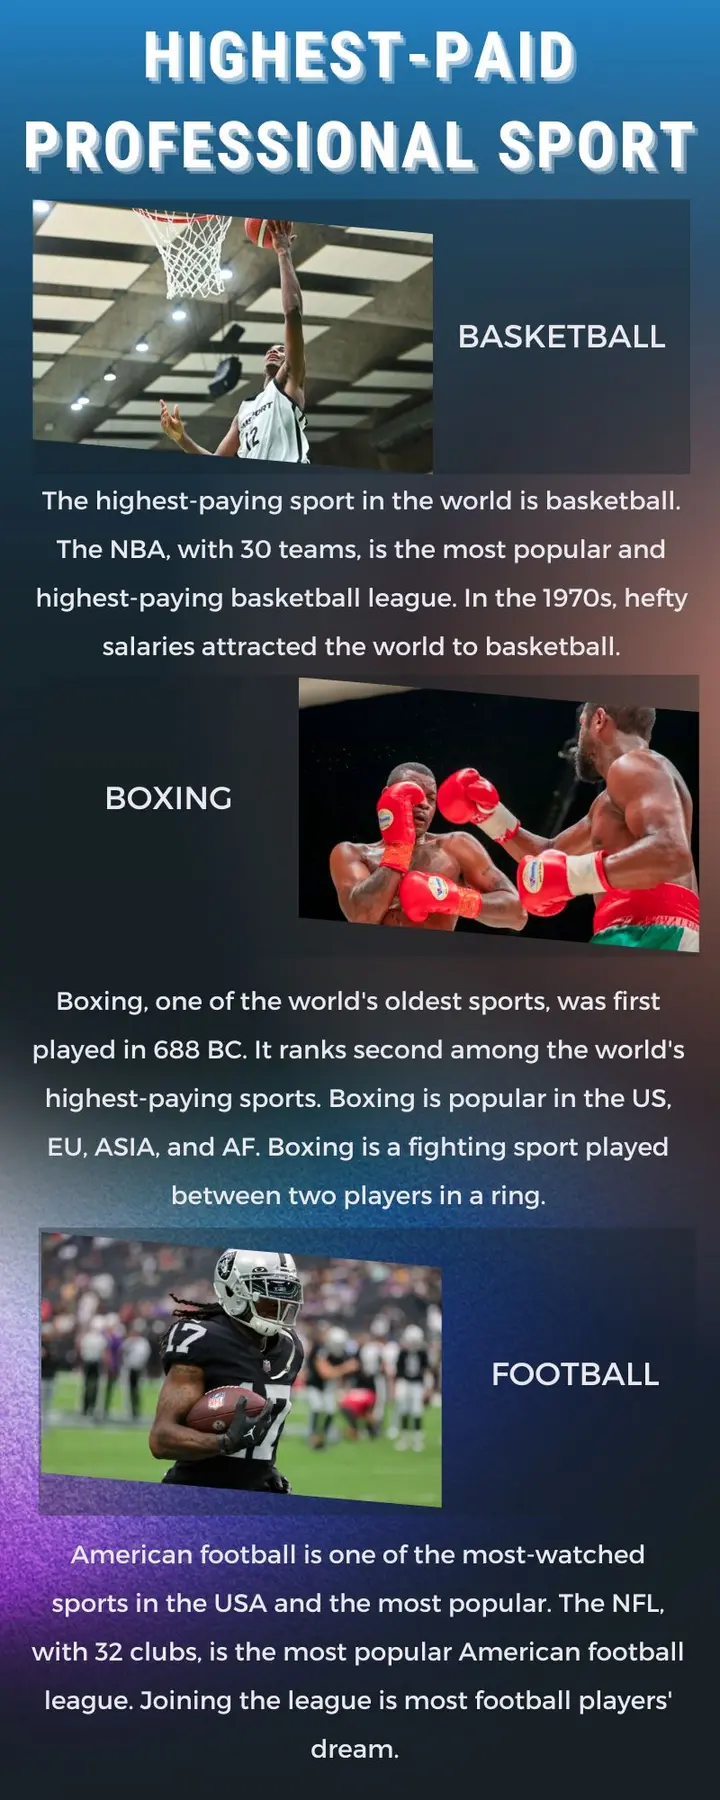 Highest-paid professional sport in the world